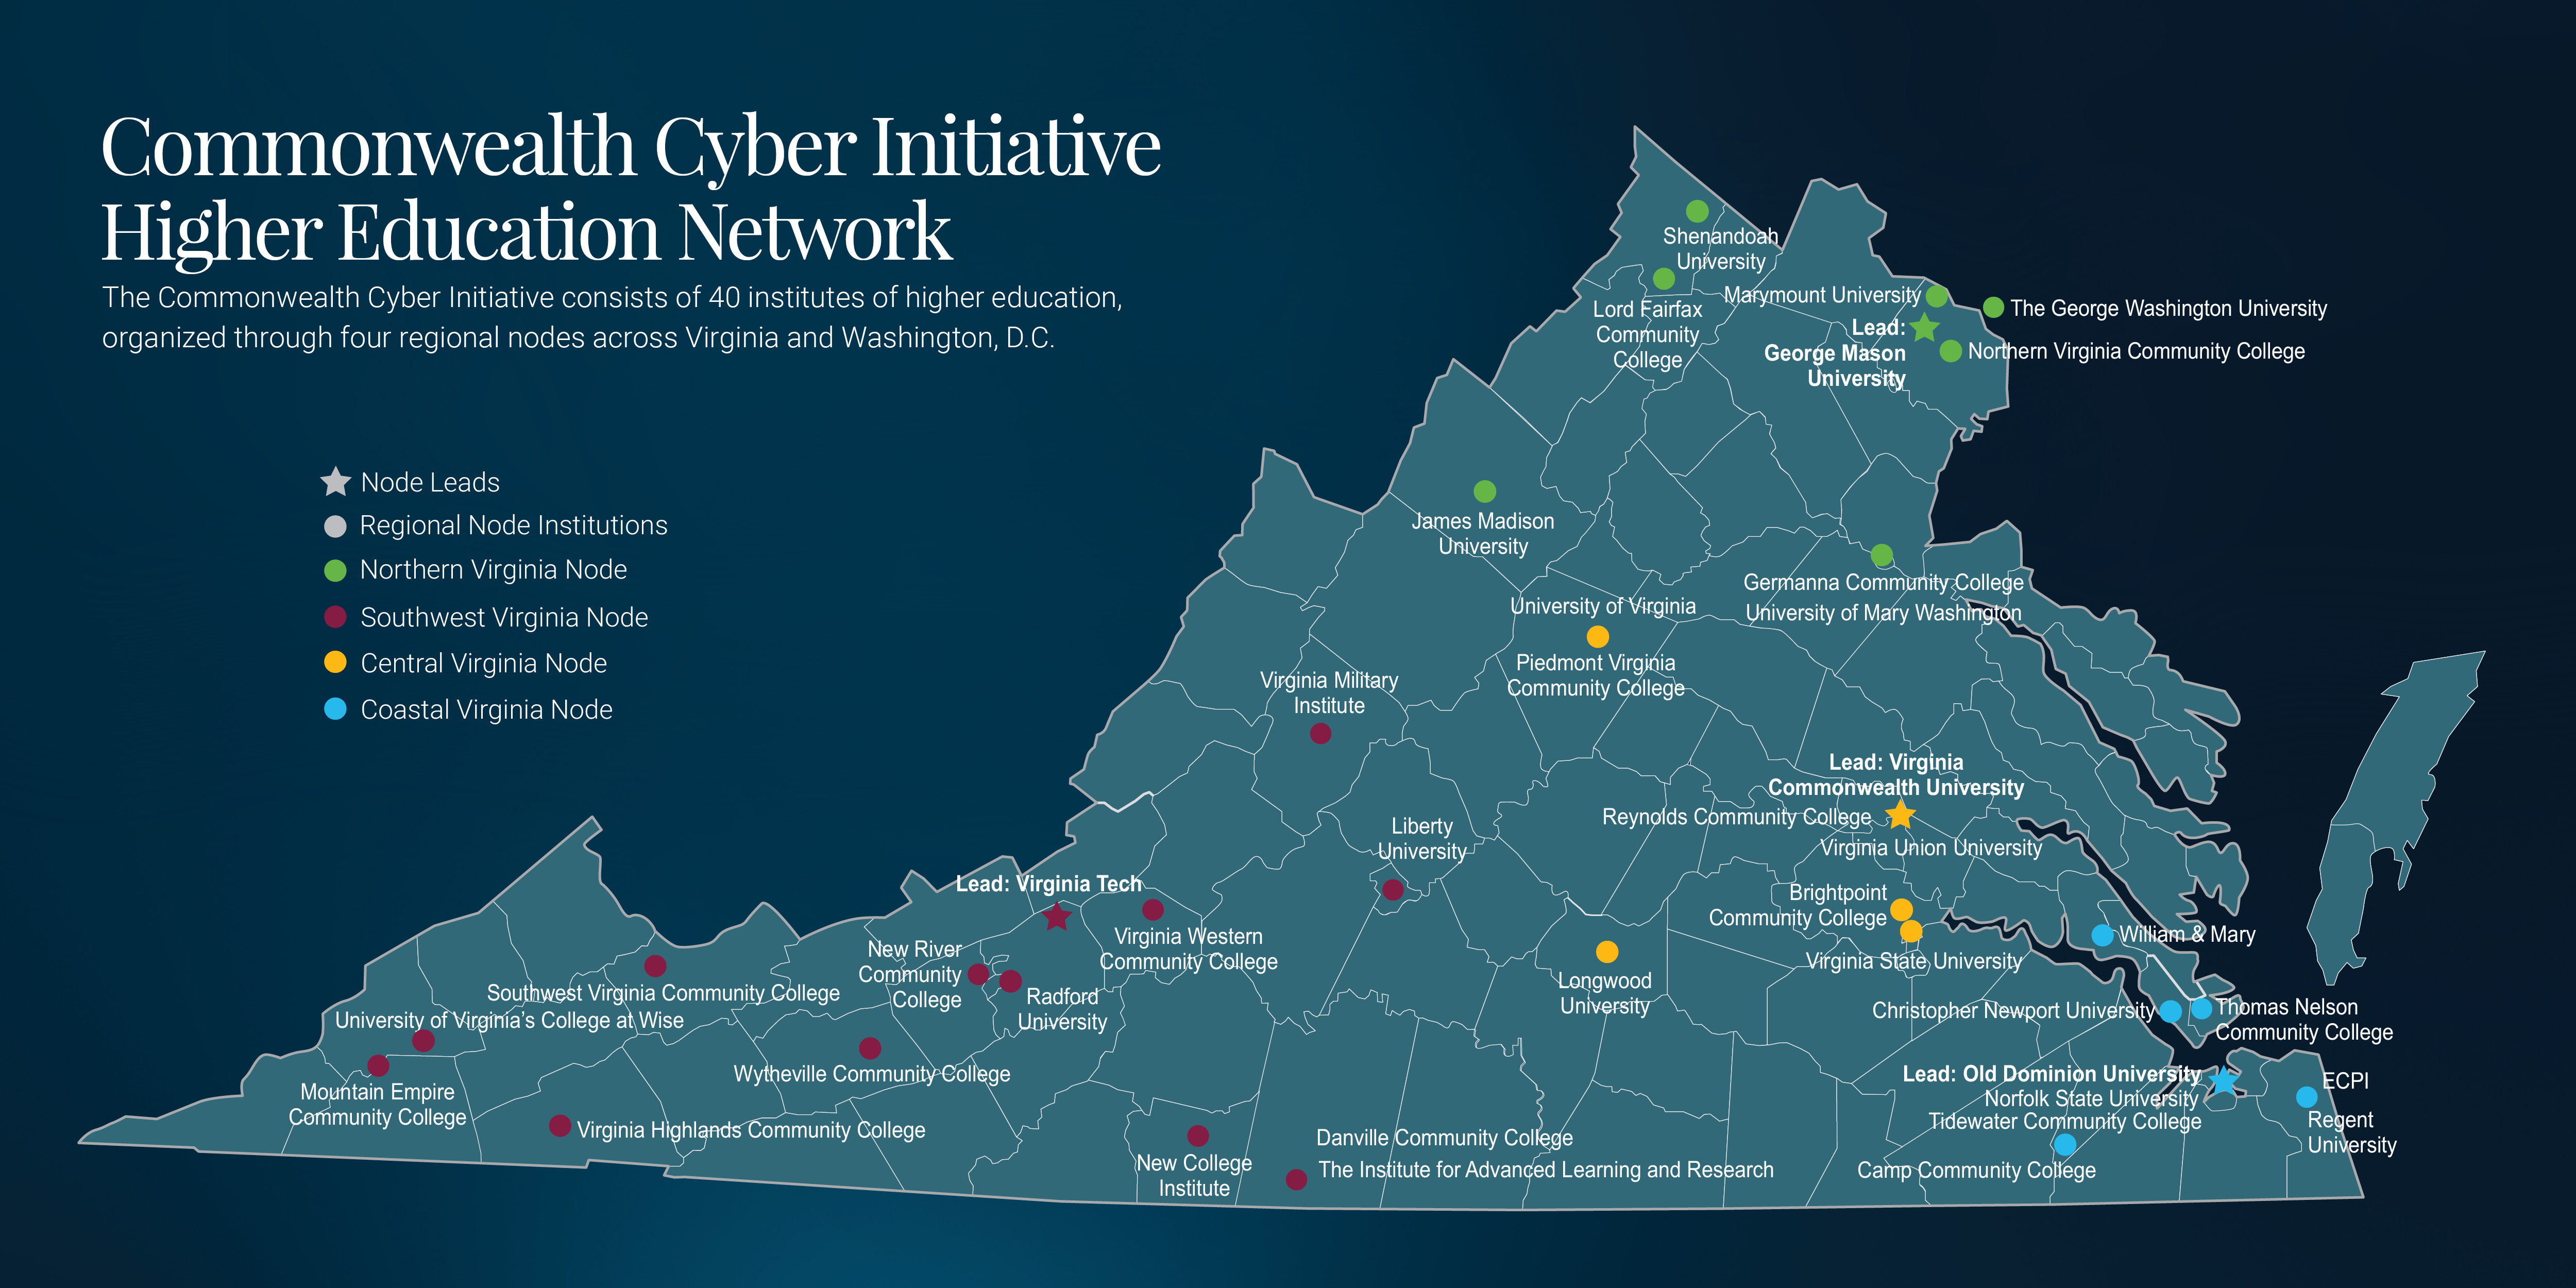 Commonwealth Cyber Initiative Higher Education Network